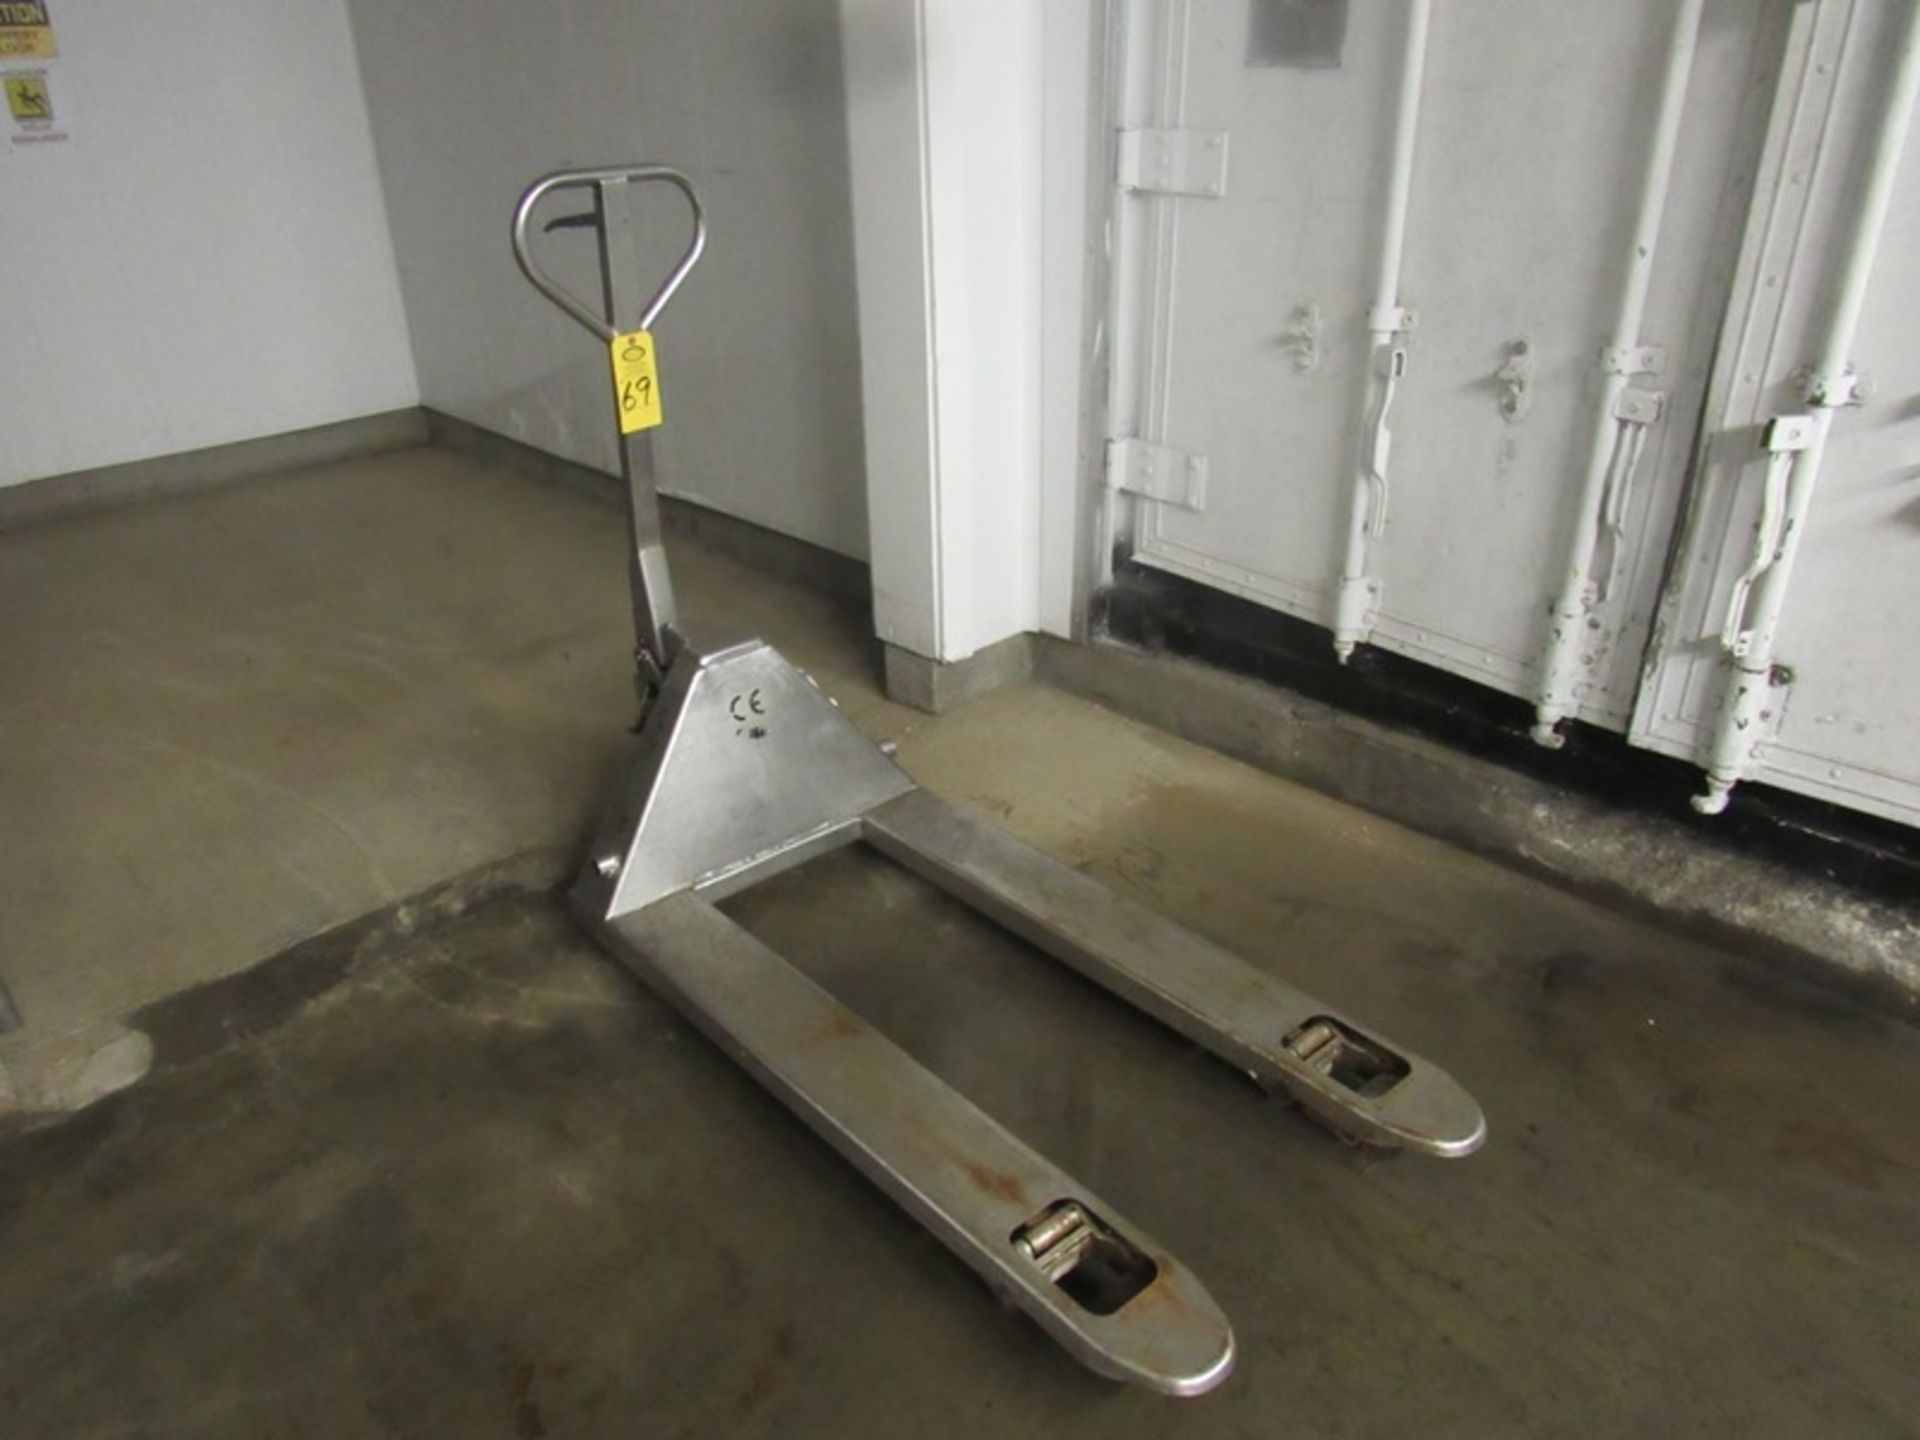 Stainless Steel Pallet Jack (Required Rigging Fee: $25.00-Payment Must Be Received by Thursday, July